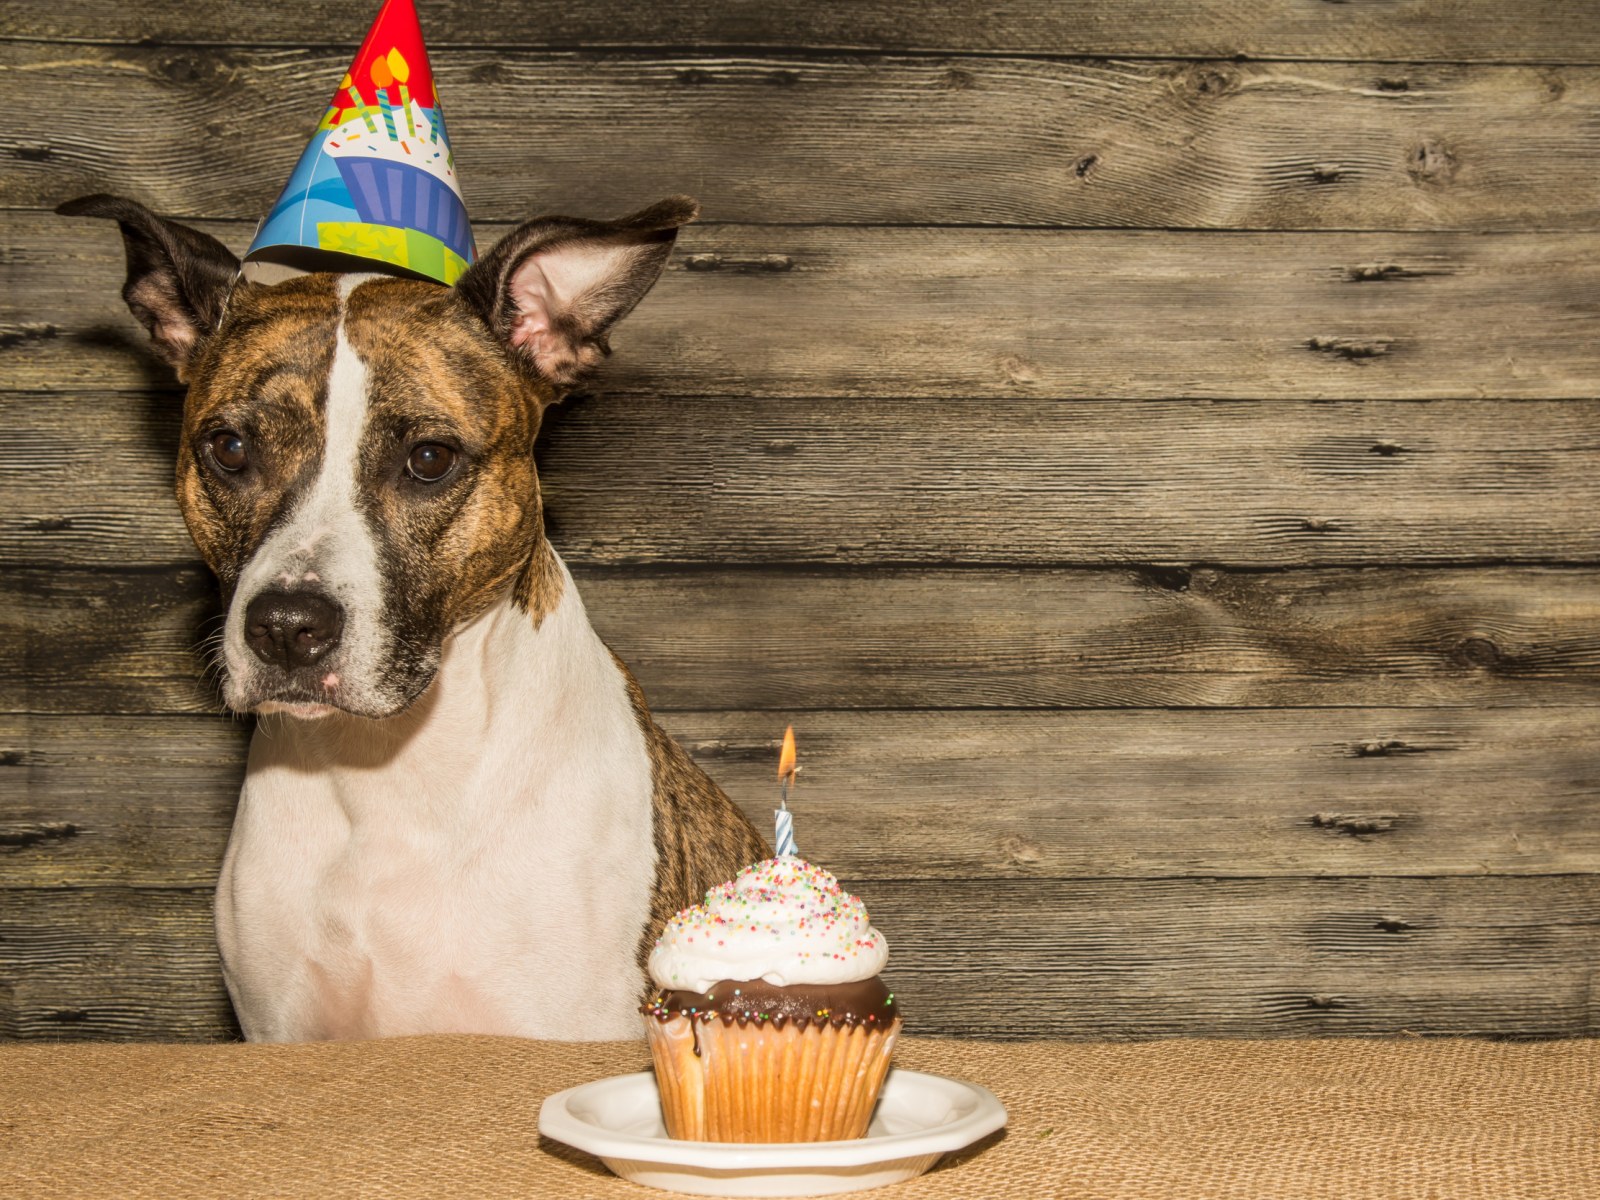 Millions Left in Hysterics Over Dog's 'Awkward' Reaction to Birthday Song